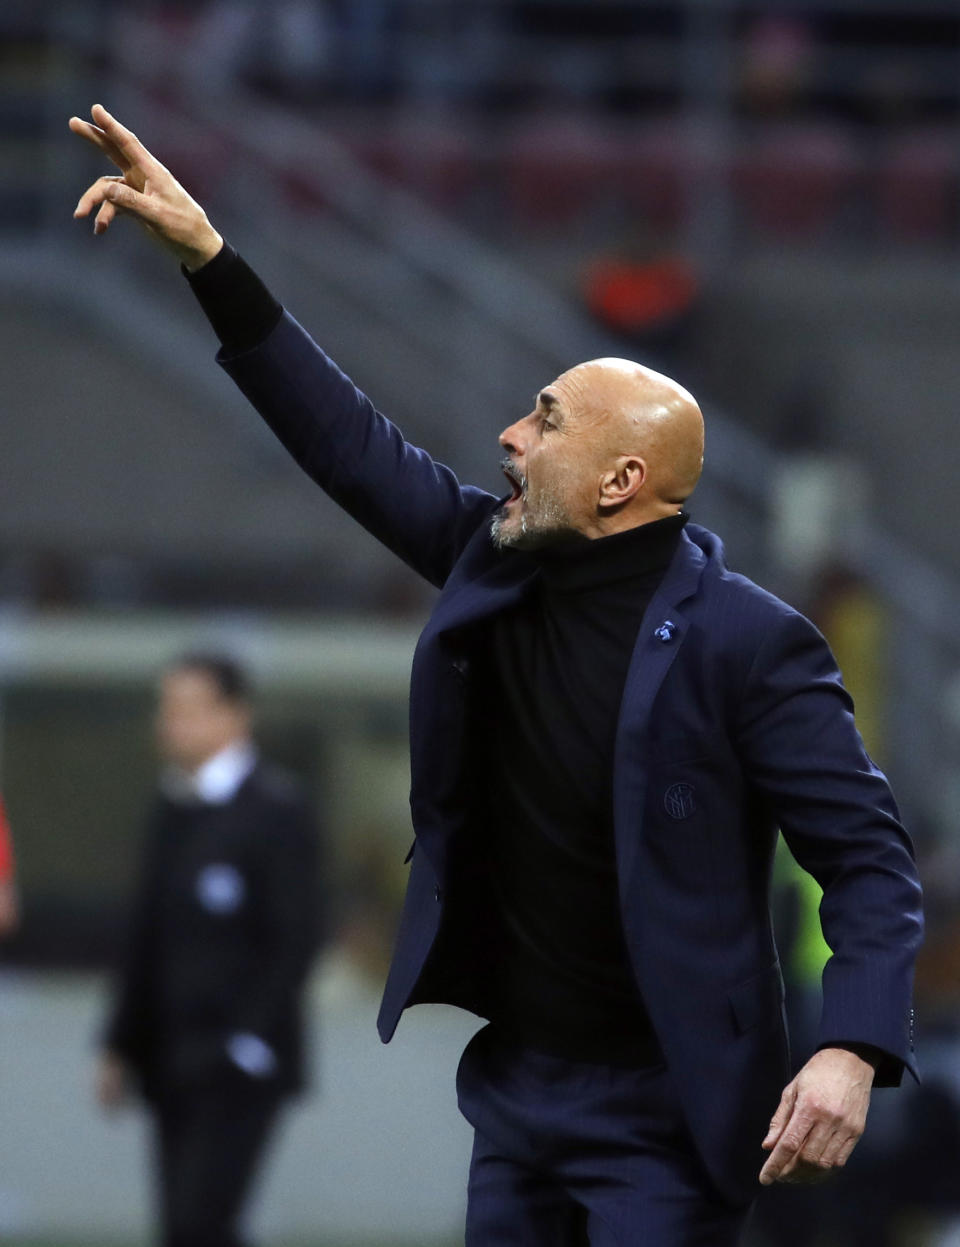 Inter Milan coach Luciano Spalletti gives instructions to his players during the Europa League round of 16 second leg soccer match between Inter Milan and Eintracht Frankfurt at the San Siro stadium in Milan, Italy, Thursday, March 14, 2019. (AP Photo/Antonio Calanni)